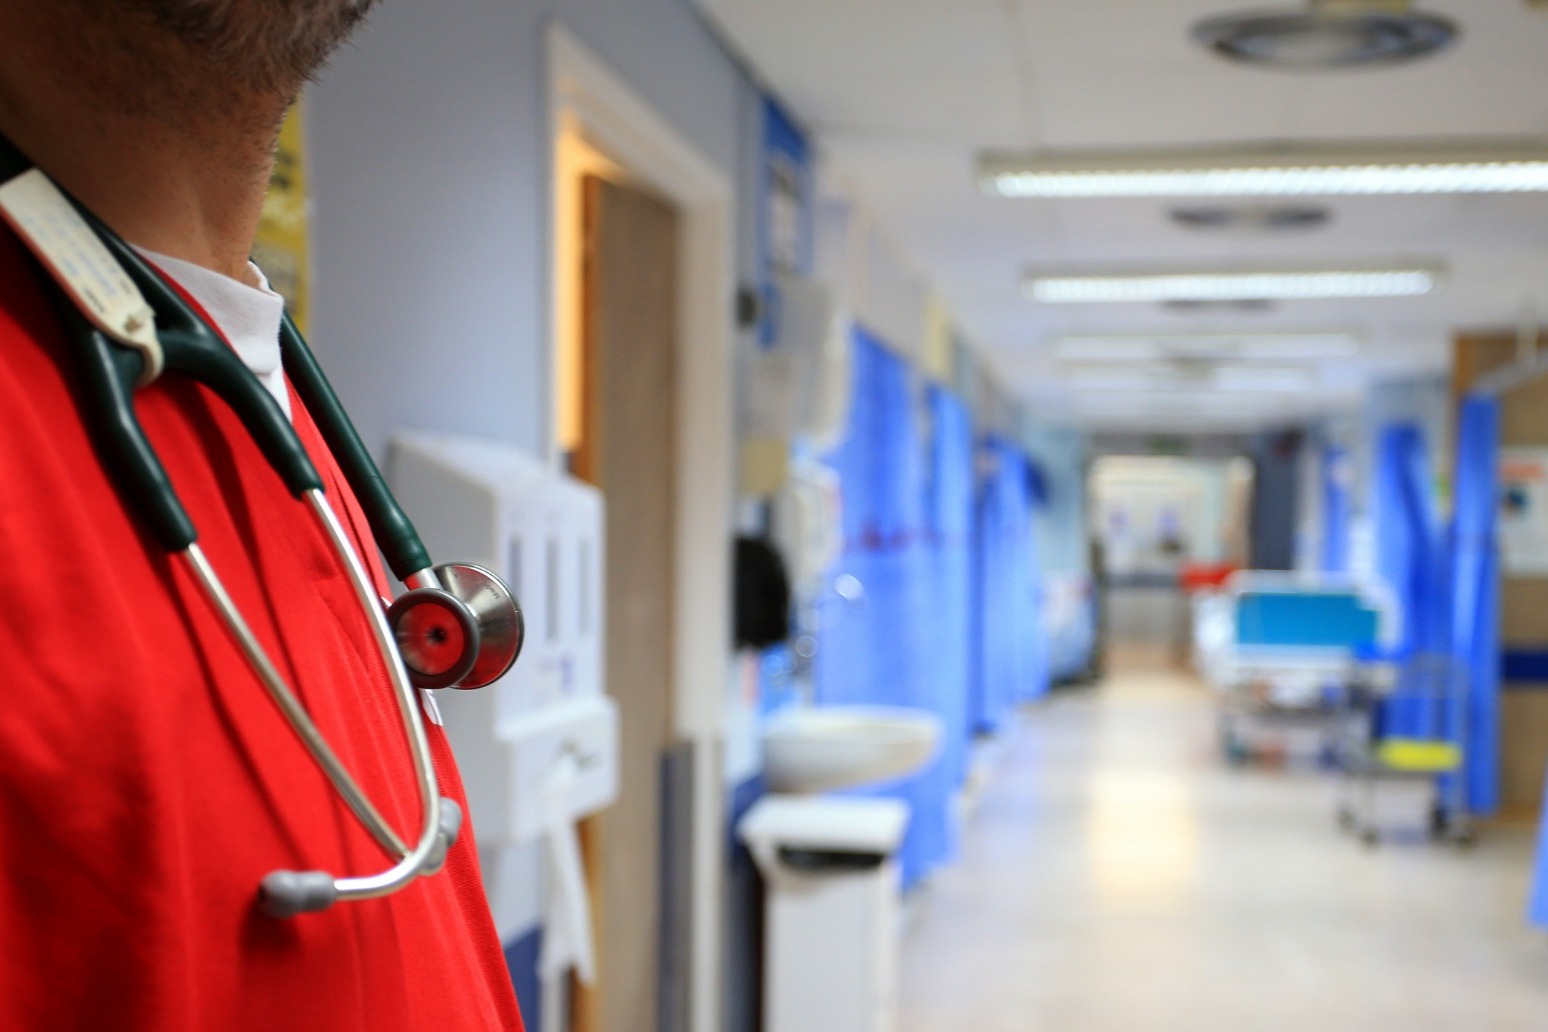 NHS backlog of two year waits shrinks from 22500 to below 200